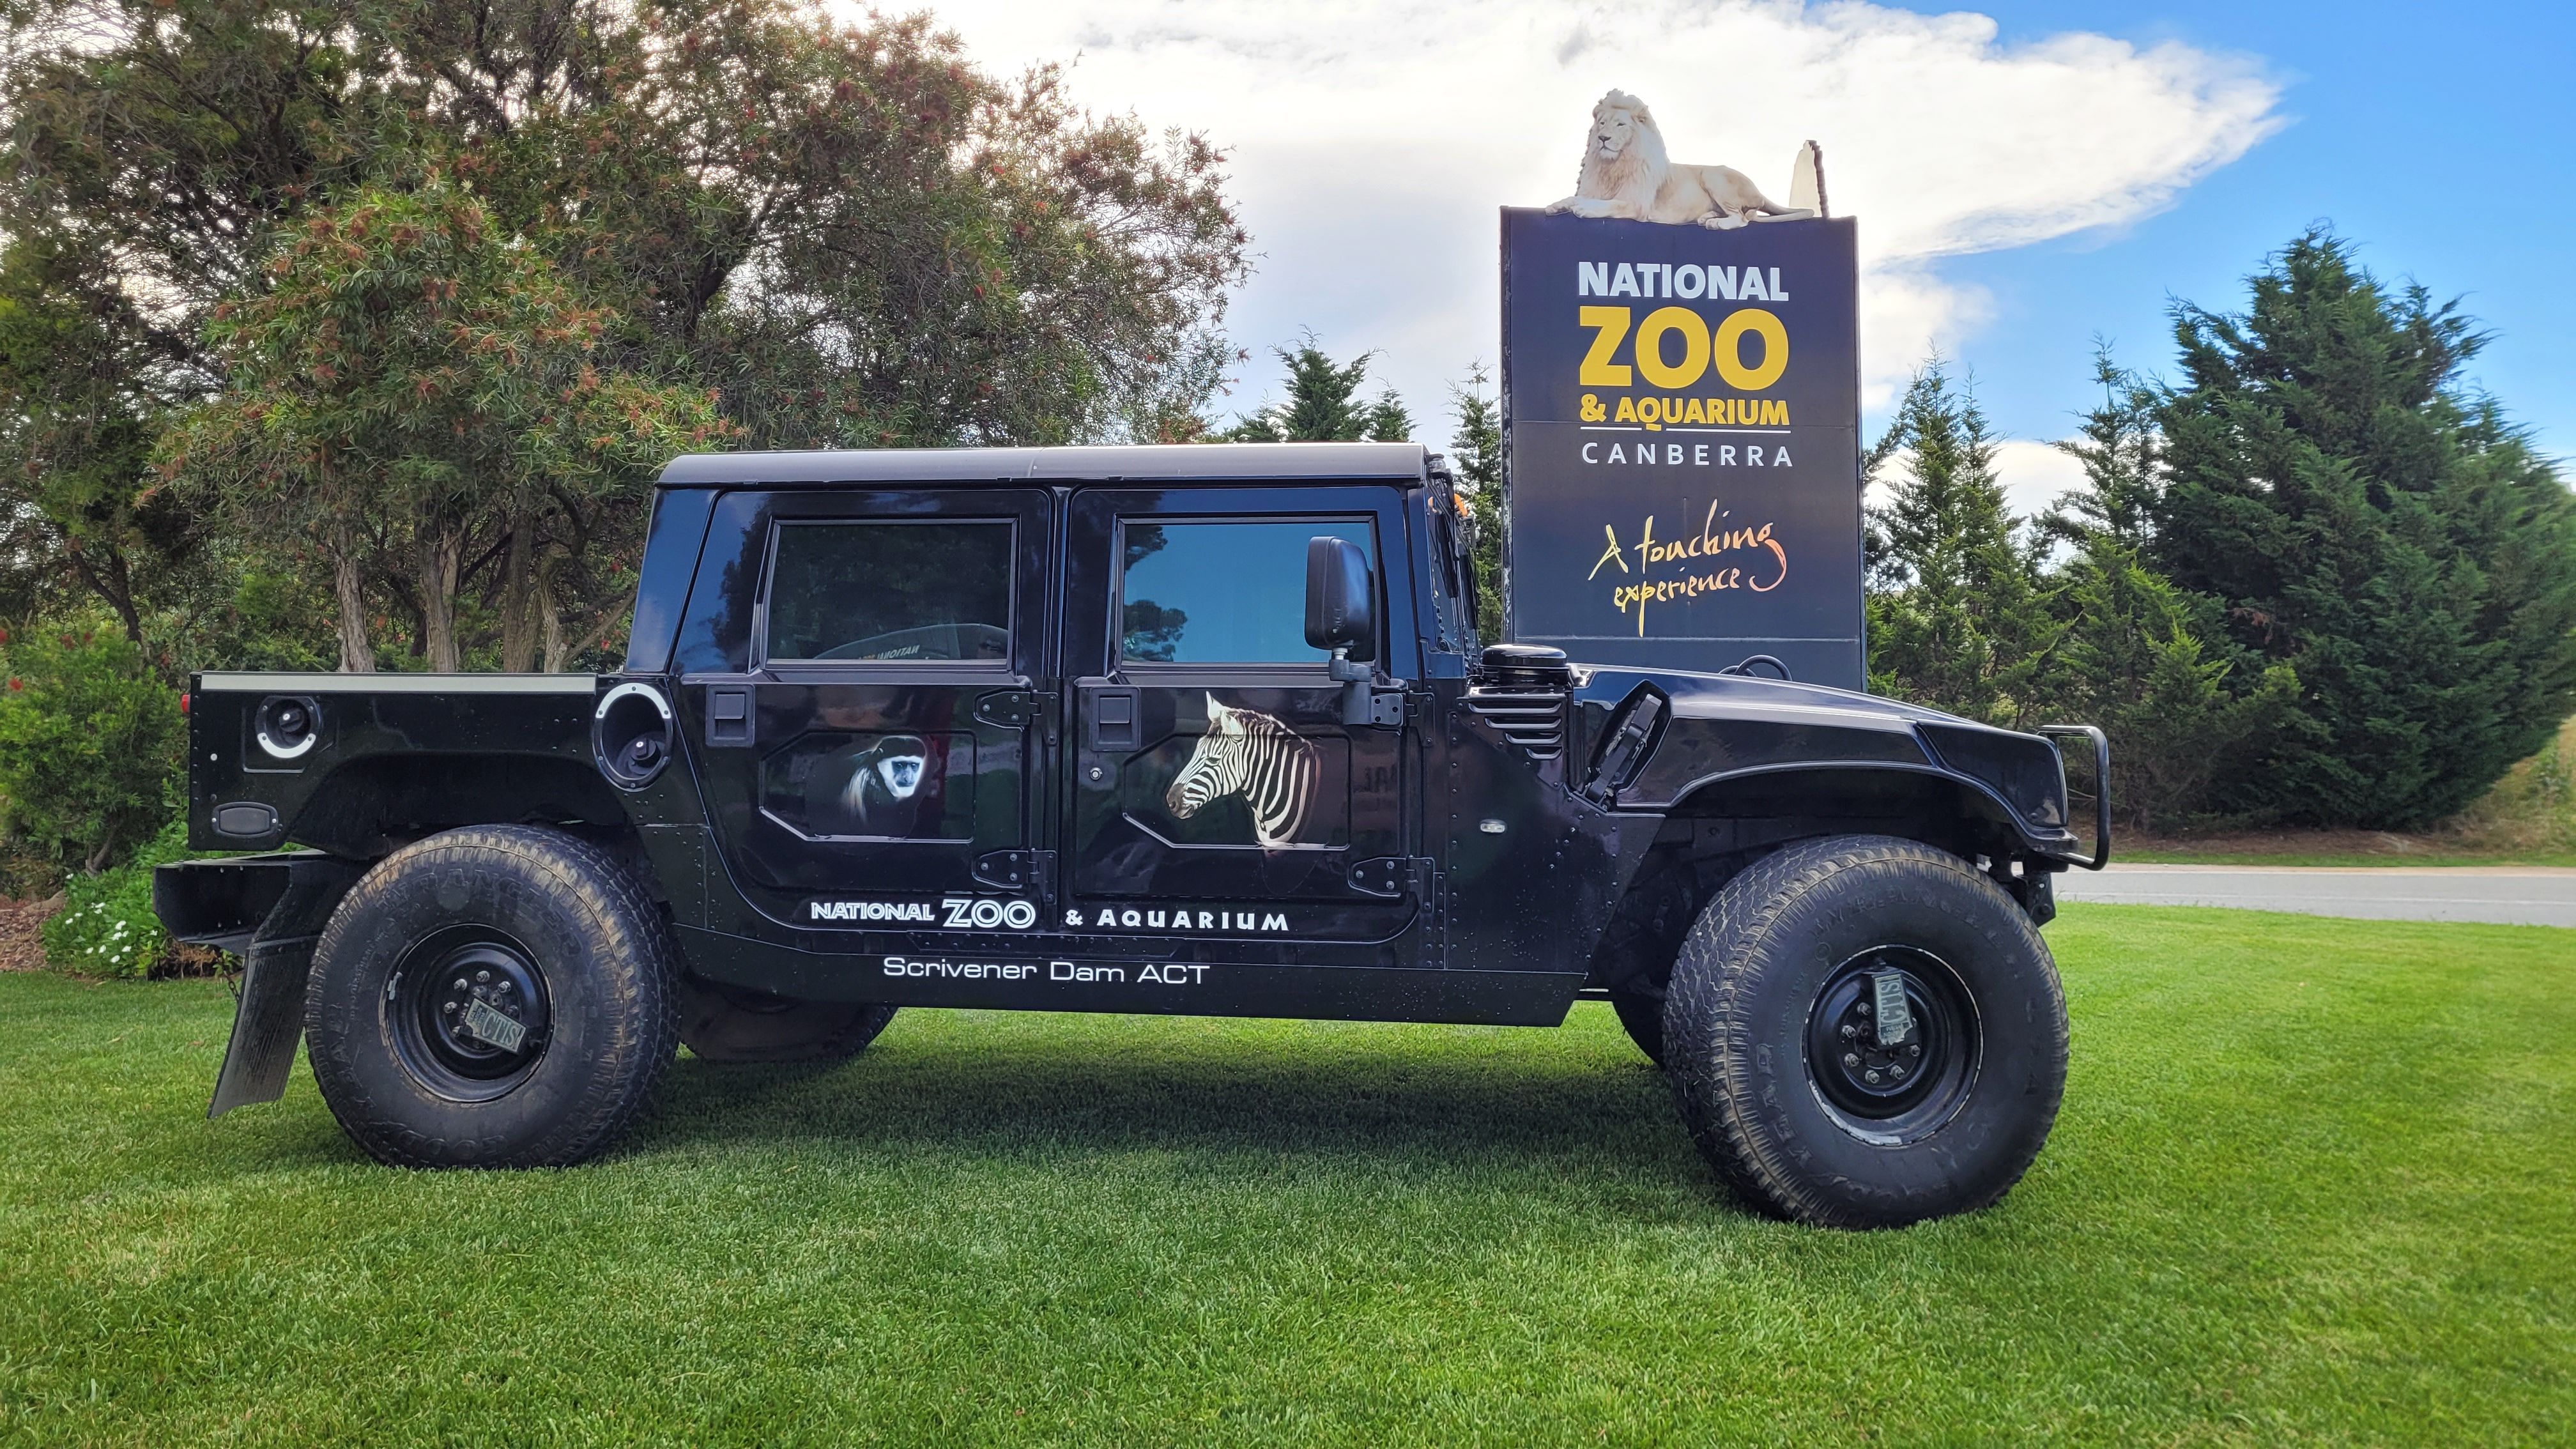 Zoo promises a wild night out with new packaged tours